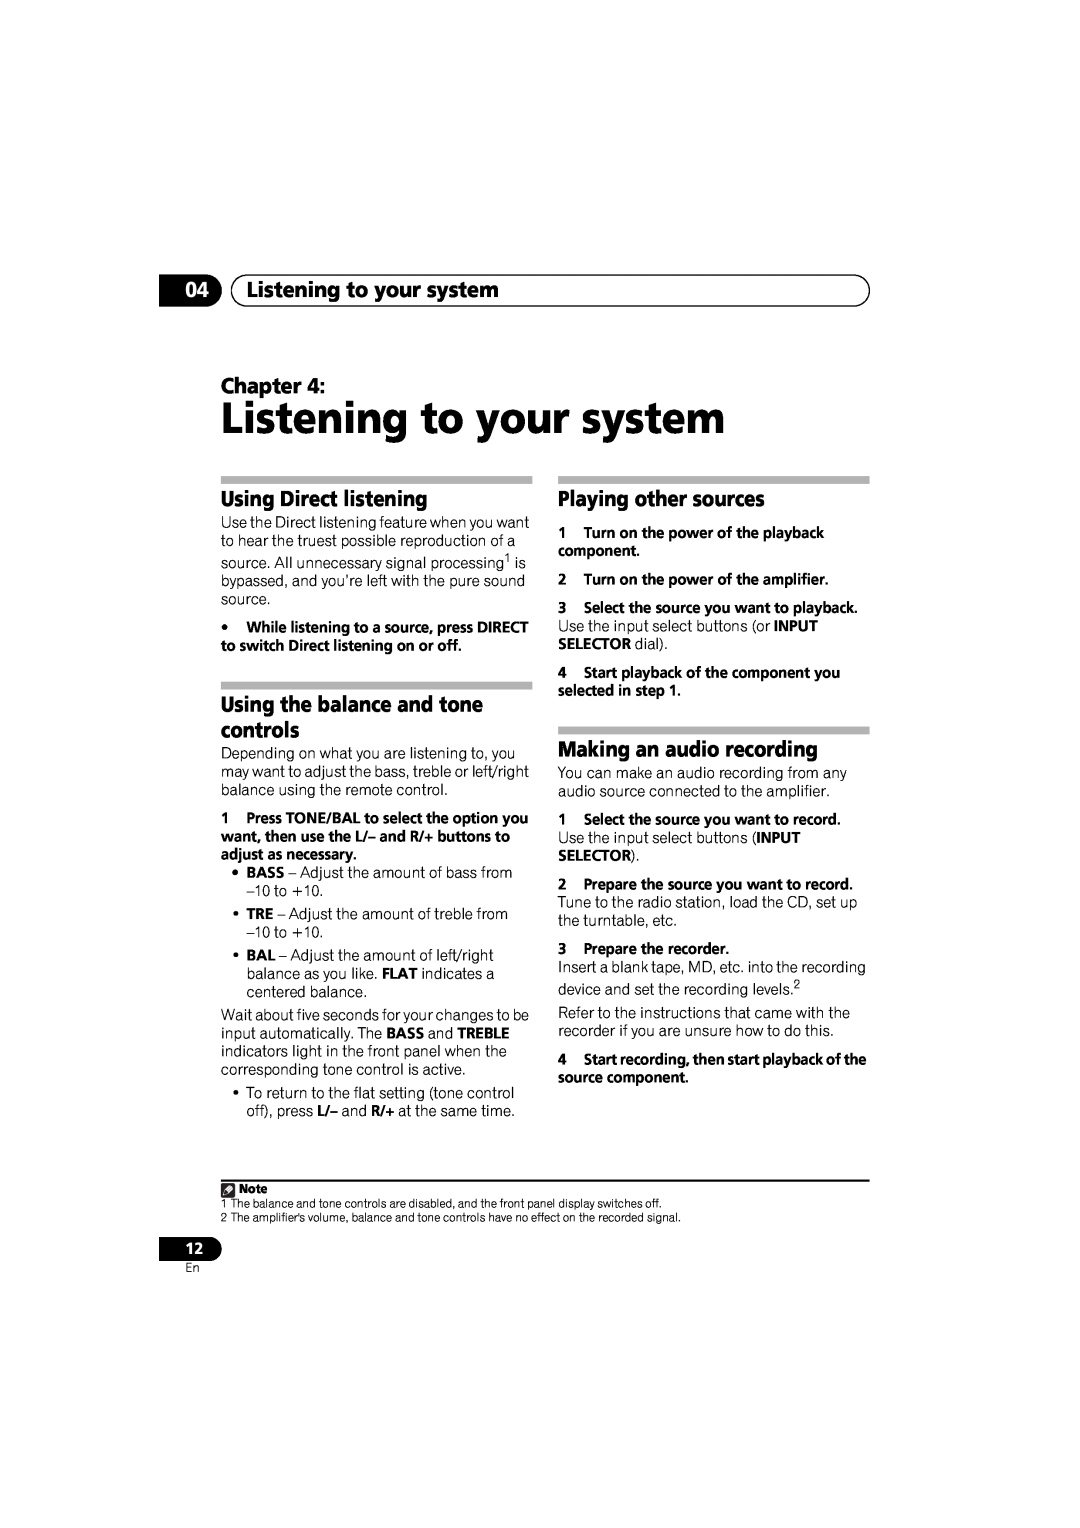 Pioneer A-A6-J manual 04Listening to your system Chapter, Using Direct listening, Using the balance and tone controls 